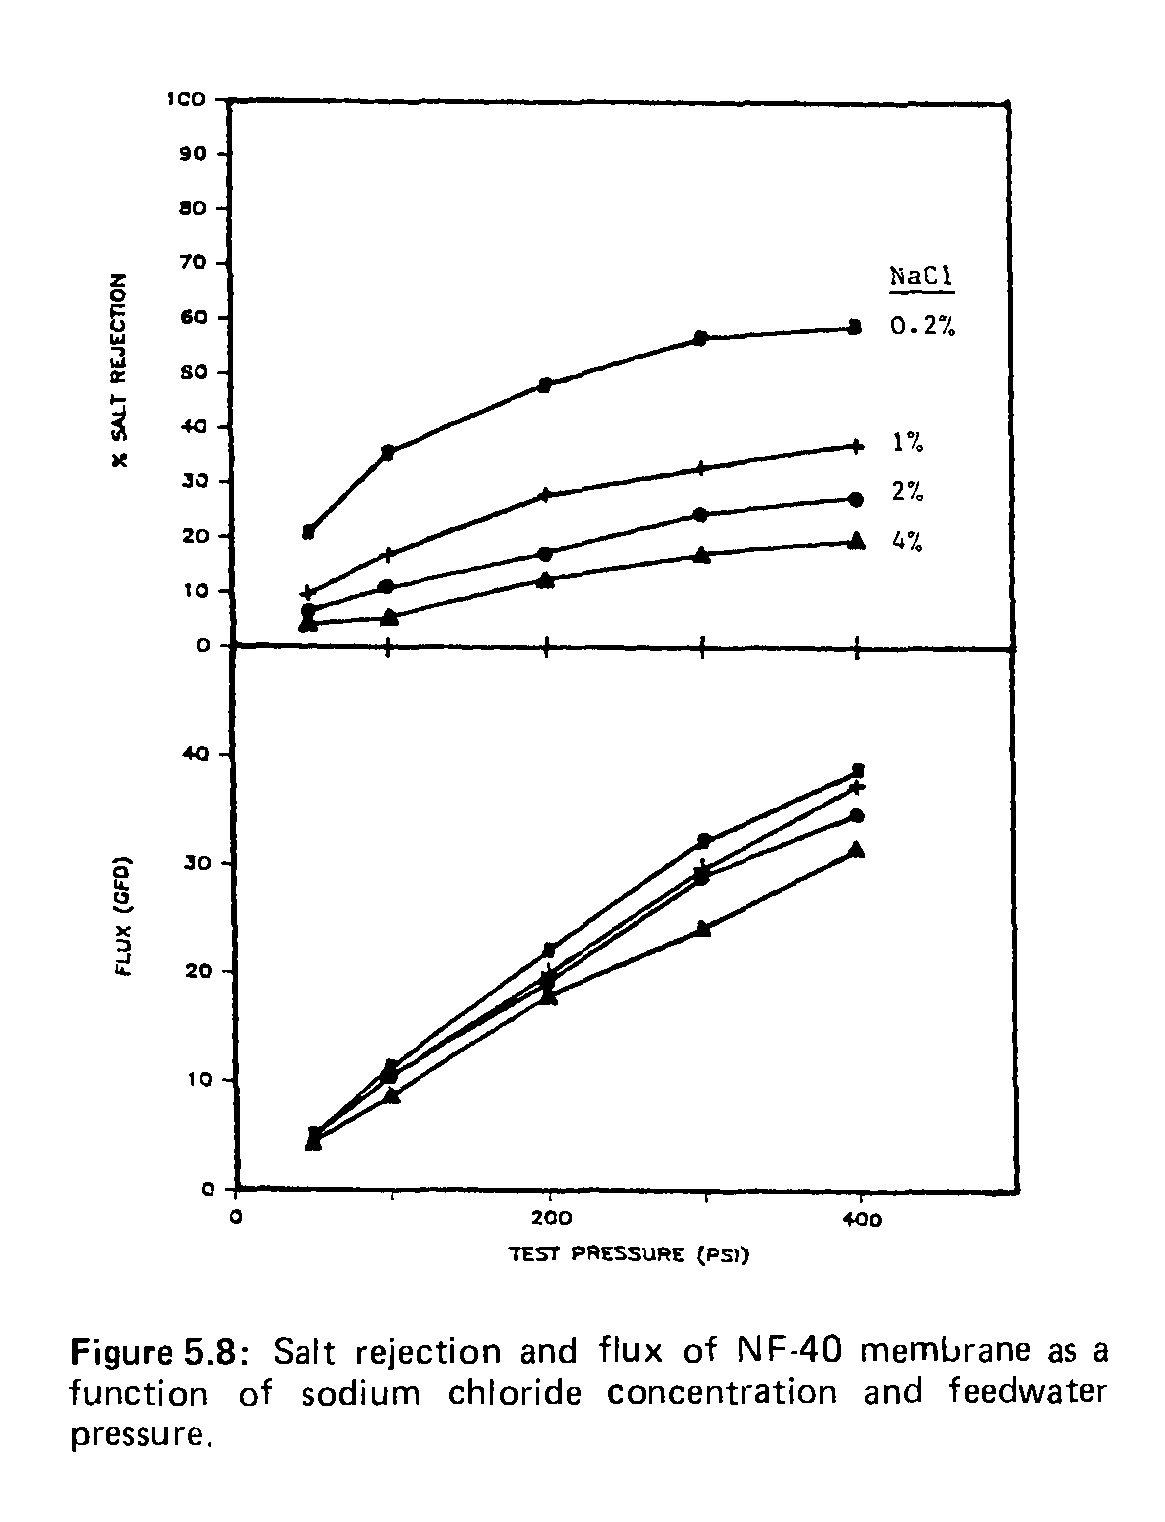 Figure 5.8 Salt rejection and flux of IMF-40 membrane as a function of sodium chloride concentration and feedwater pressure.